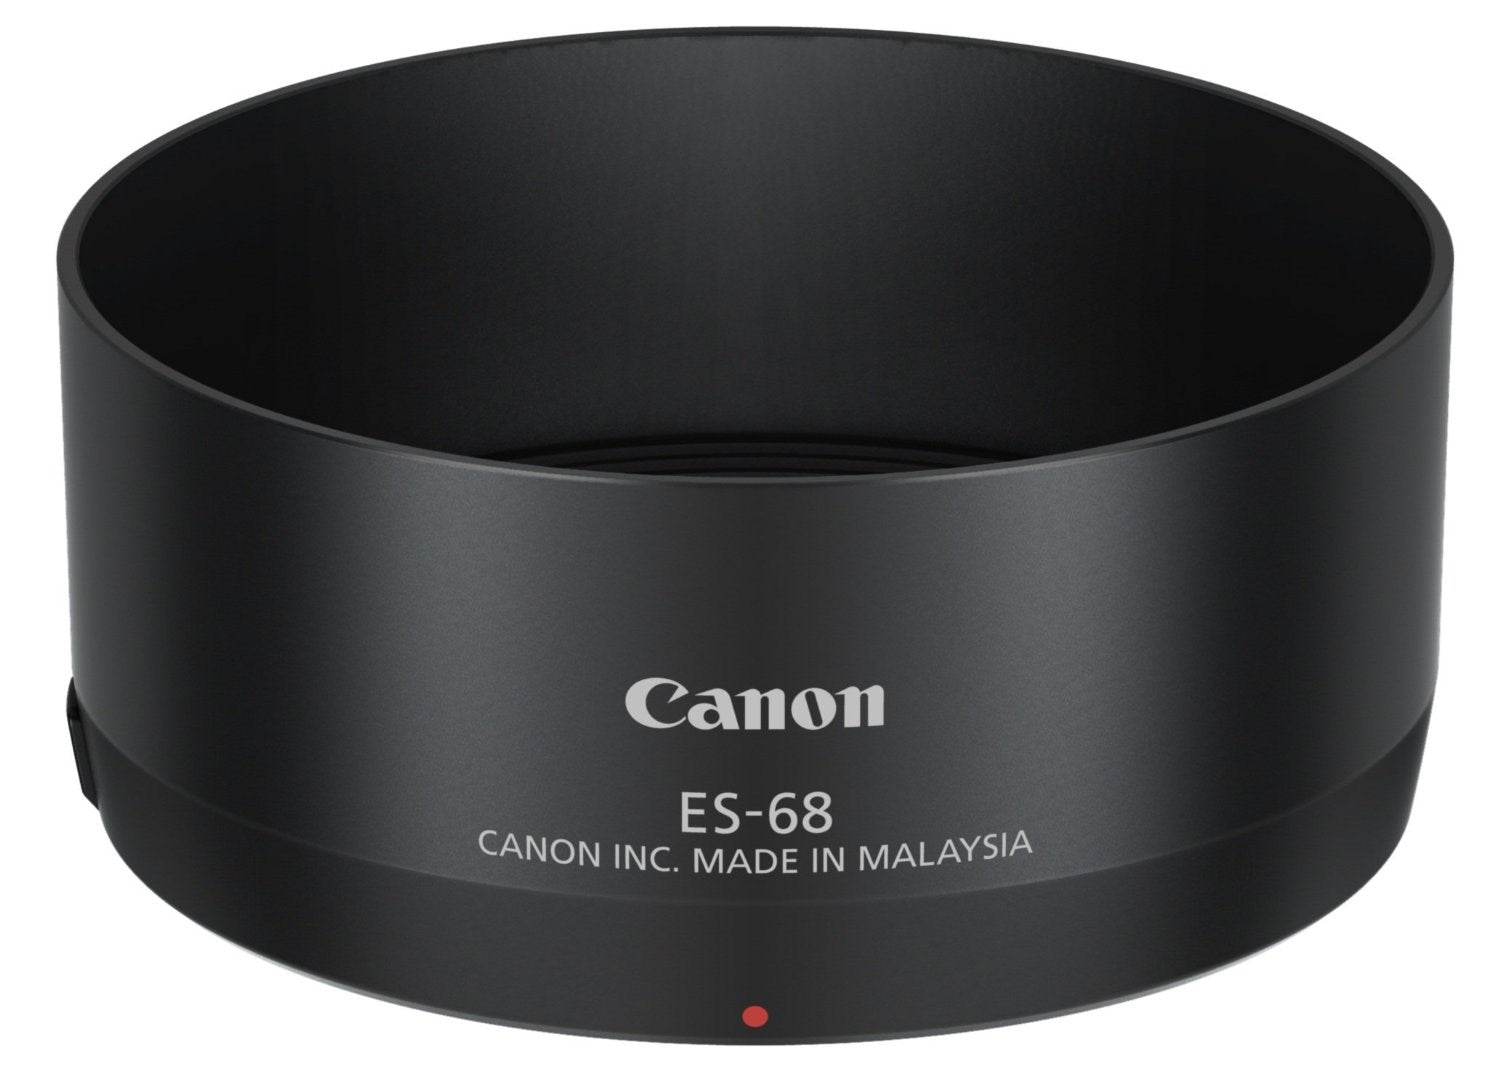 Product Image of Canon ES-68 Lens Hood for the new 50MM F1.8 STM lens